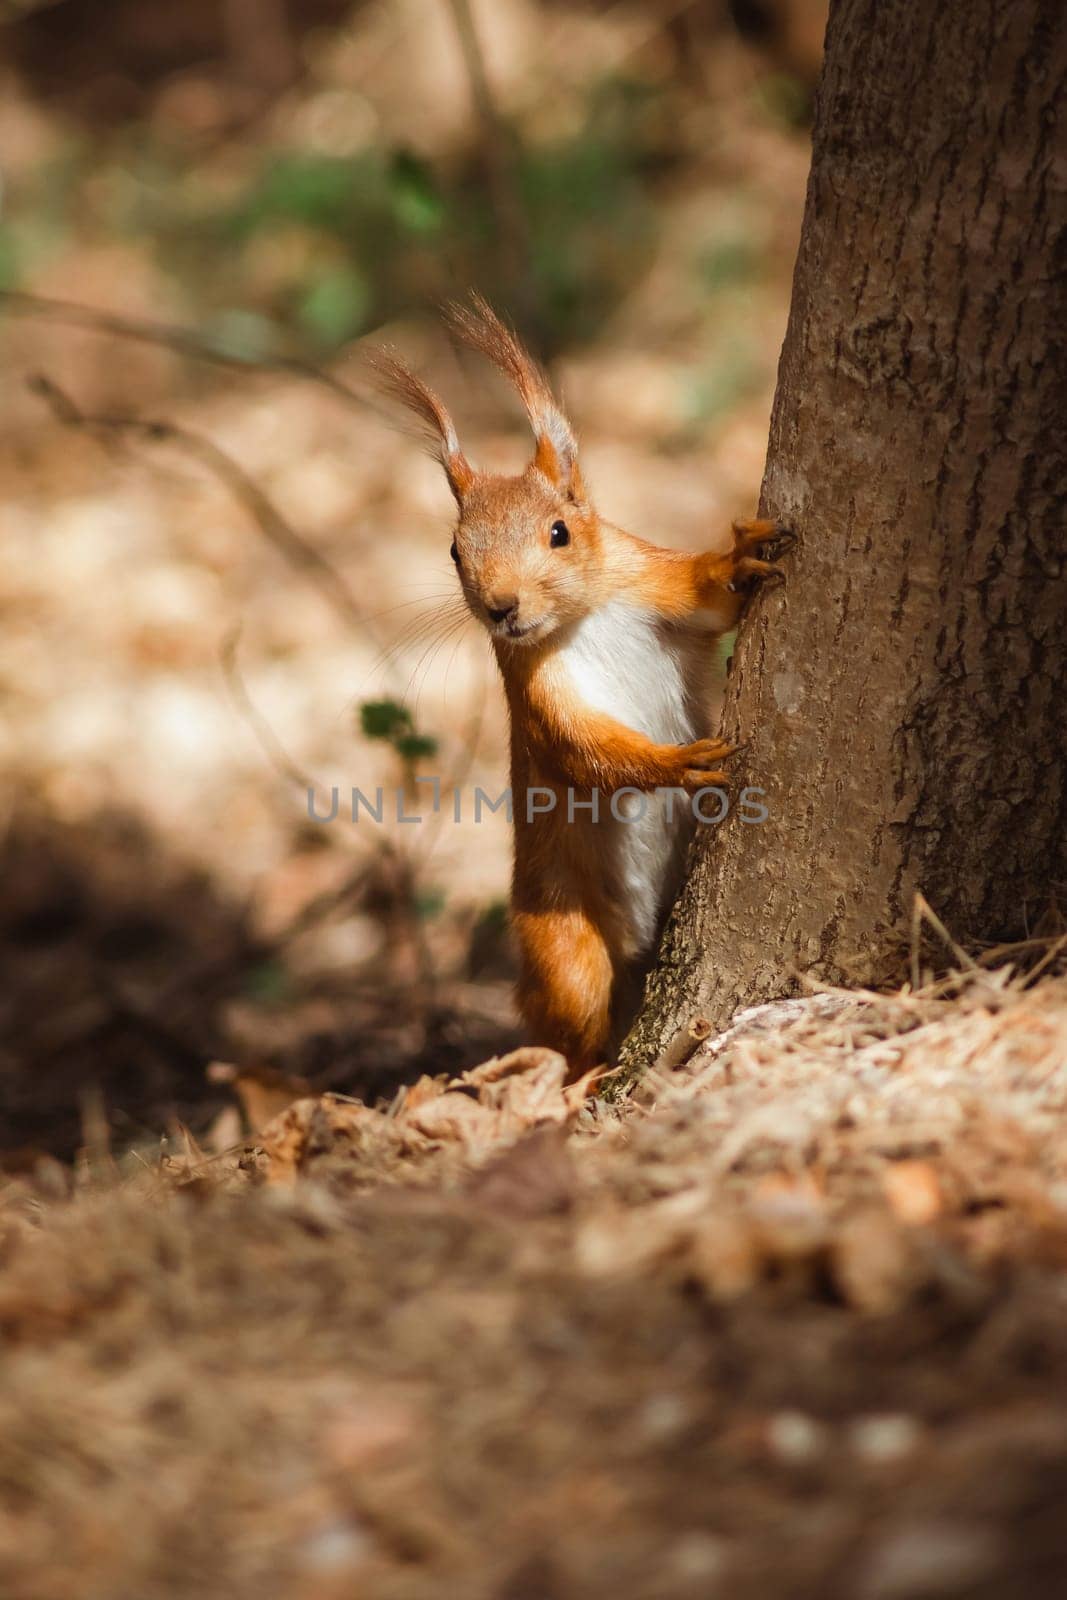 A curious red squirrel peeks out from behind a tree. Wild animals in their natural habitat